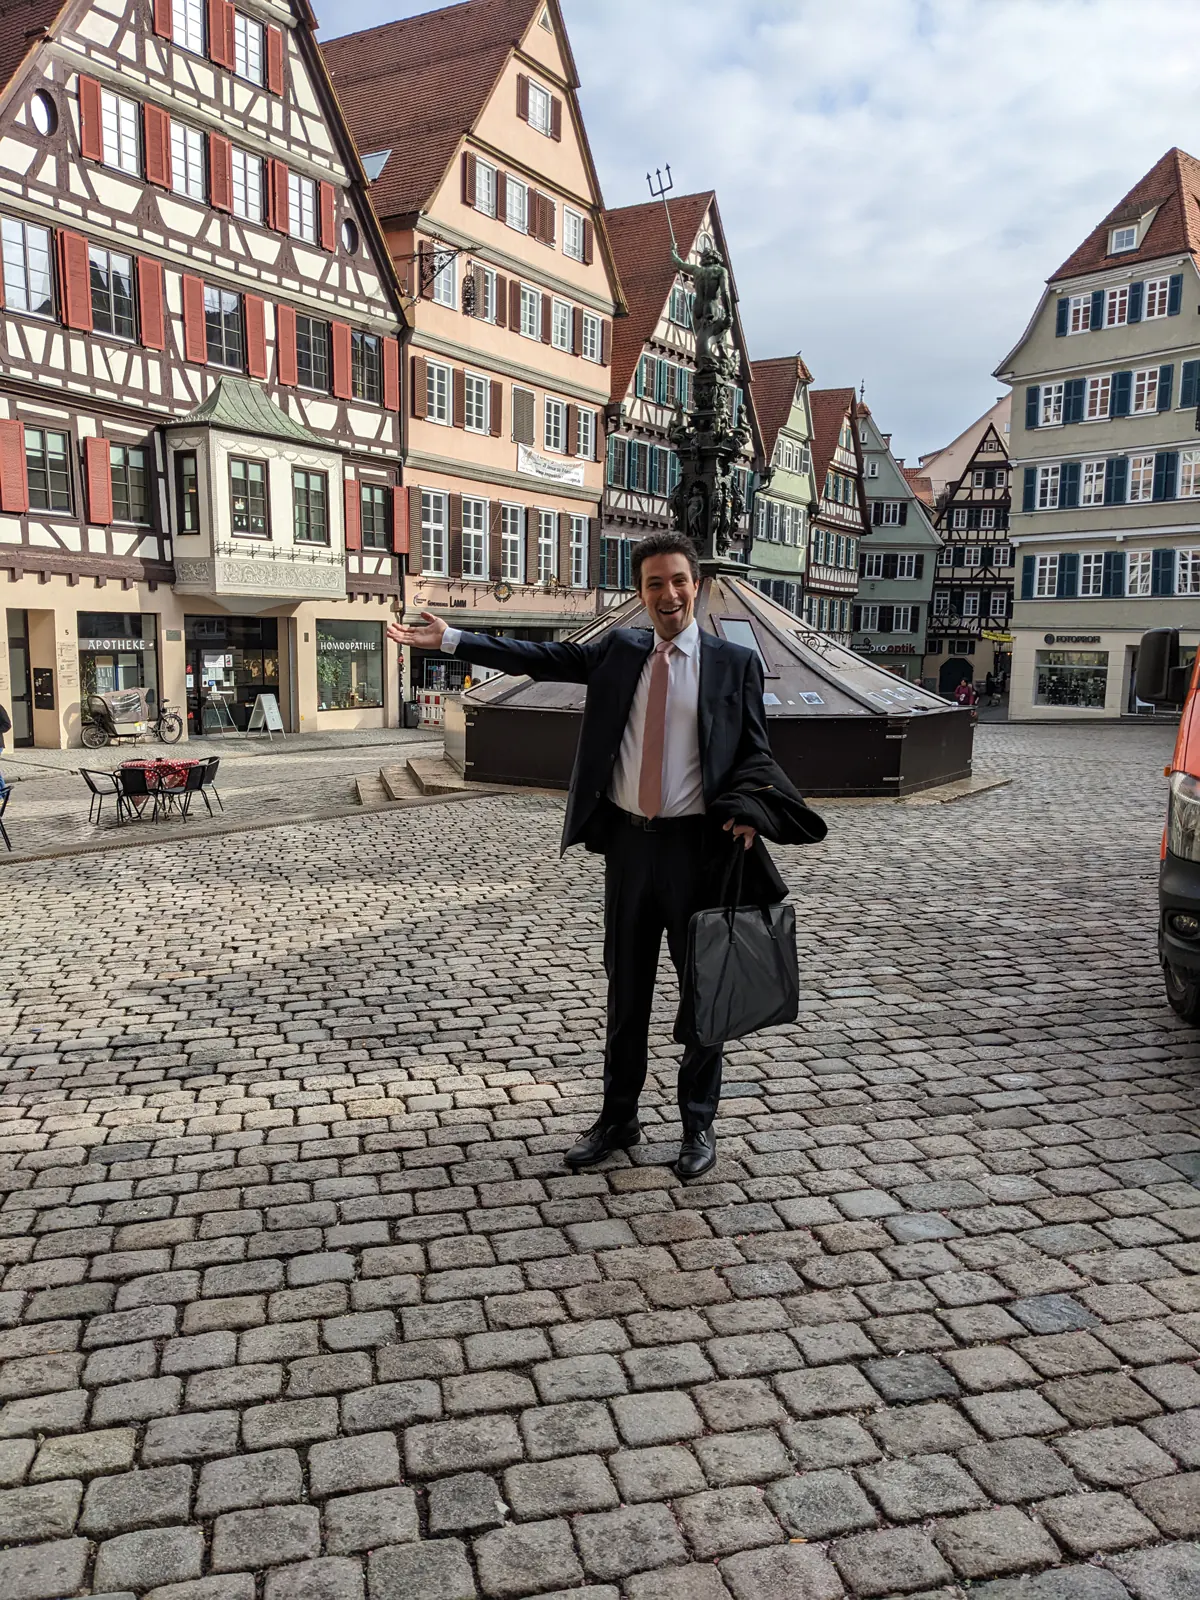 Photo of me in a Germany town square